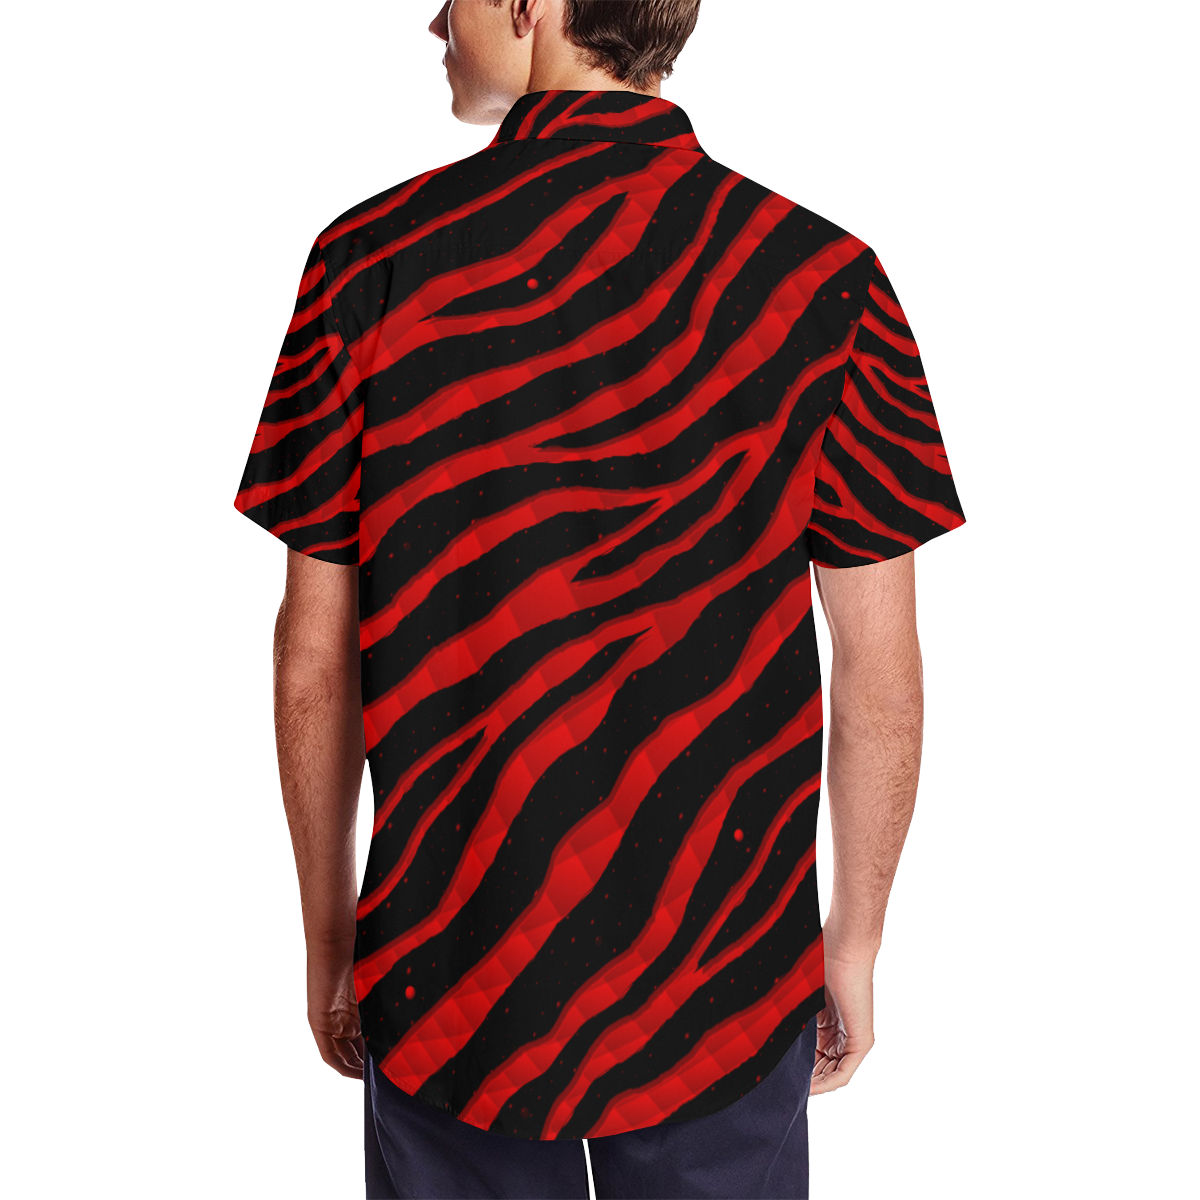 Ripped SpaceTime Stripes - Red Men's Short Sleeve Shirt with Lapel Collar (Model T54)